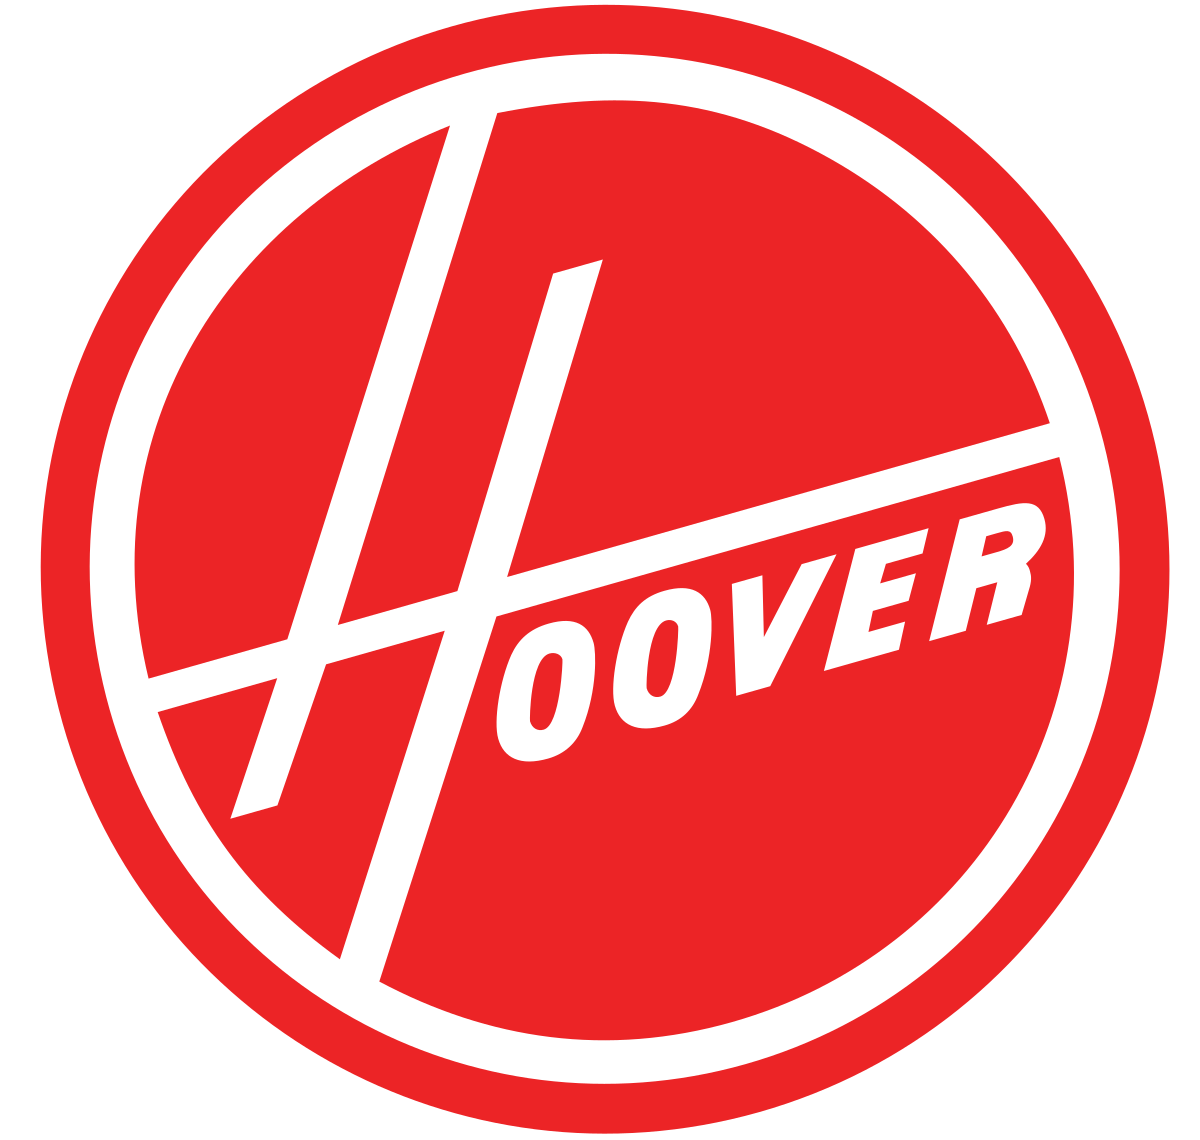 The Official Hoover Logo